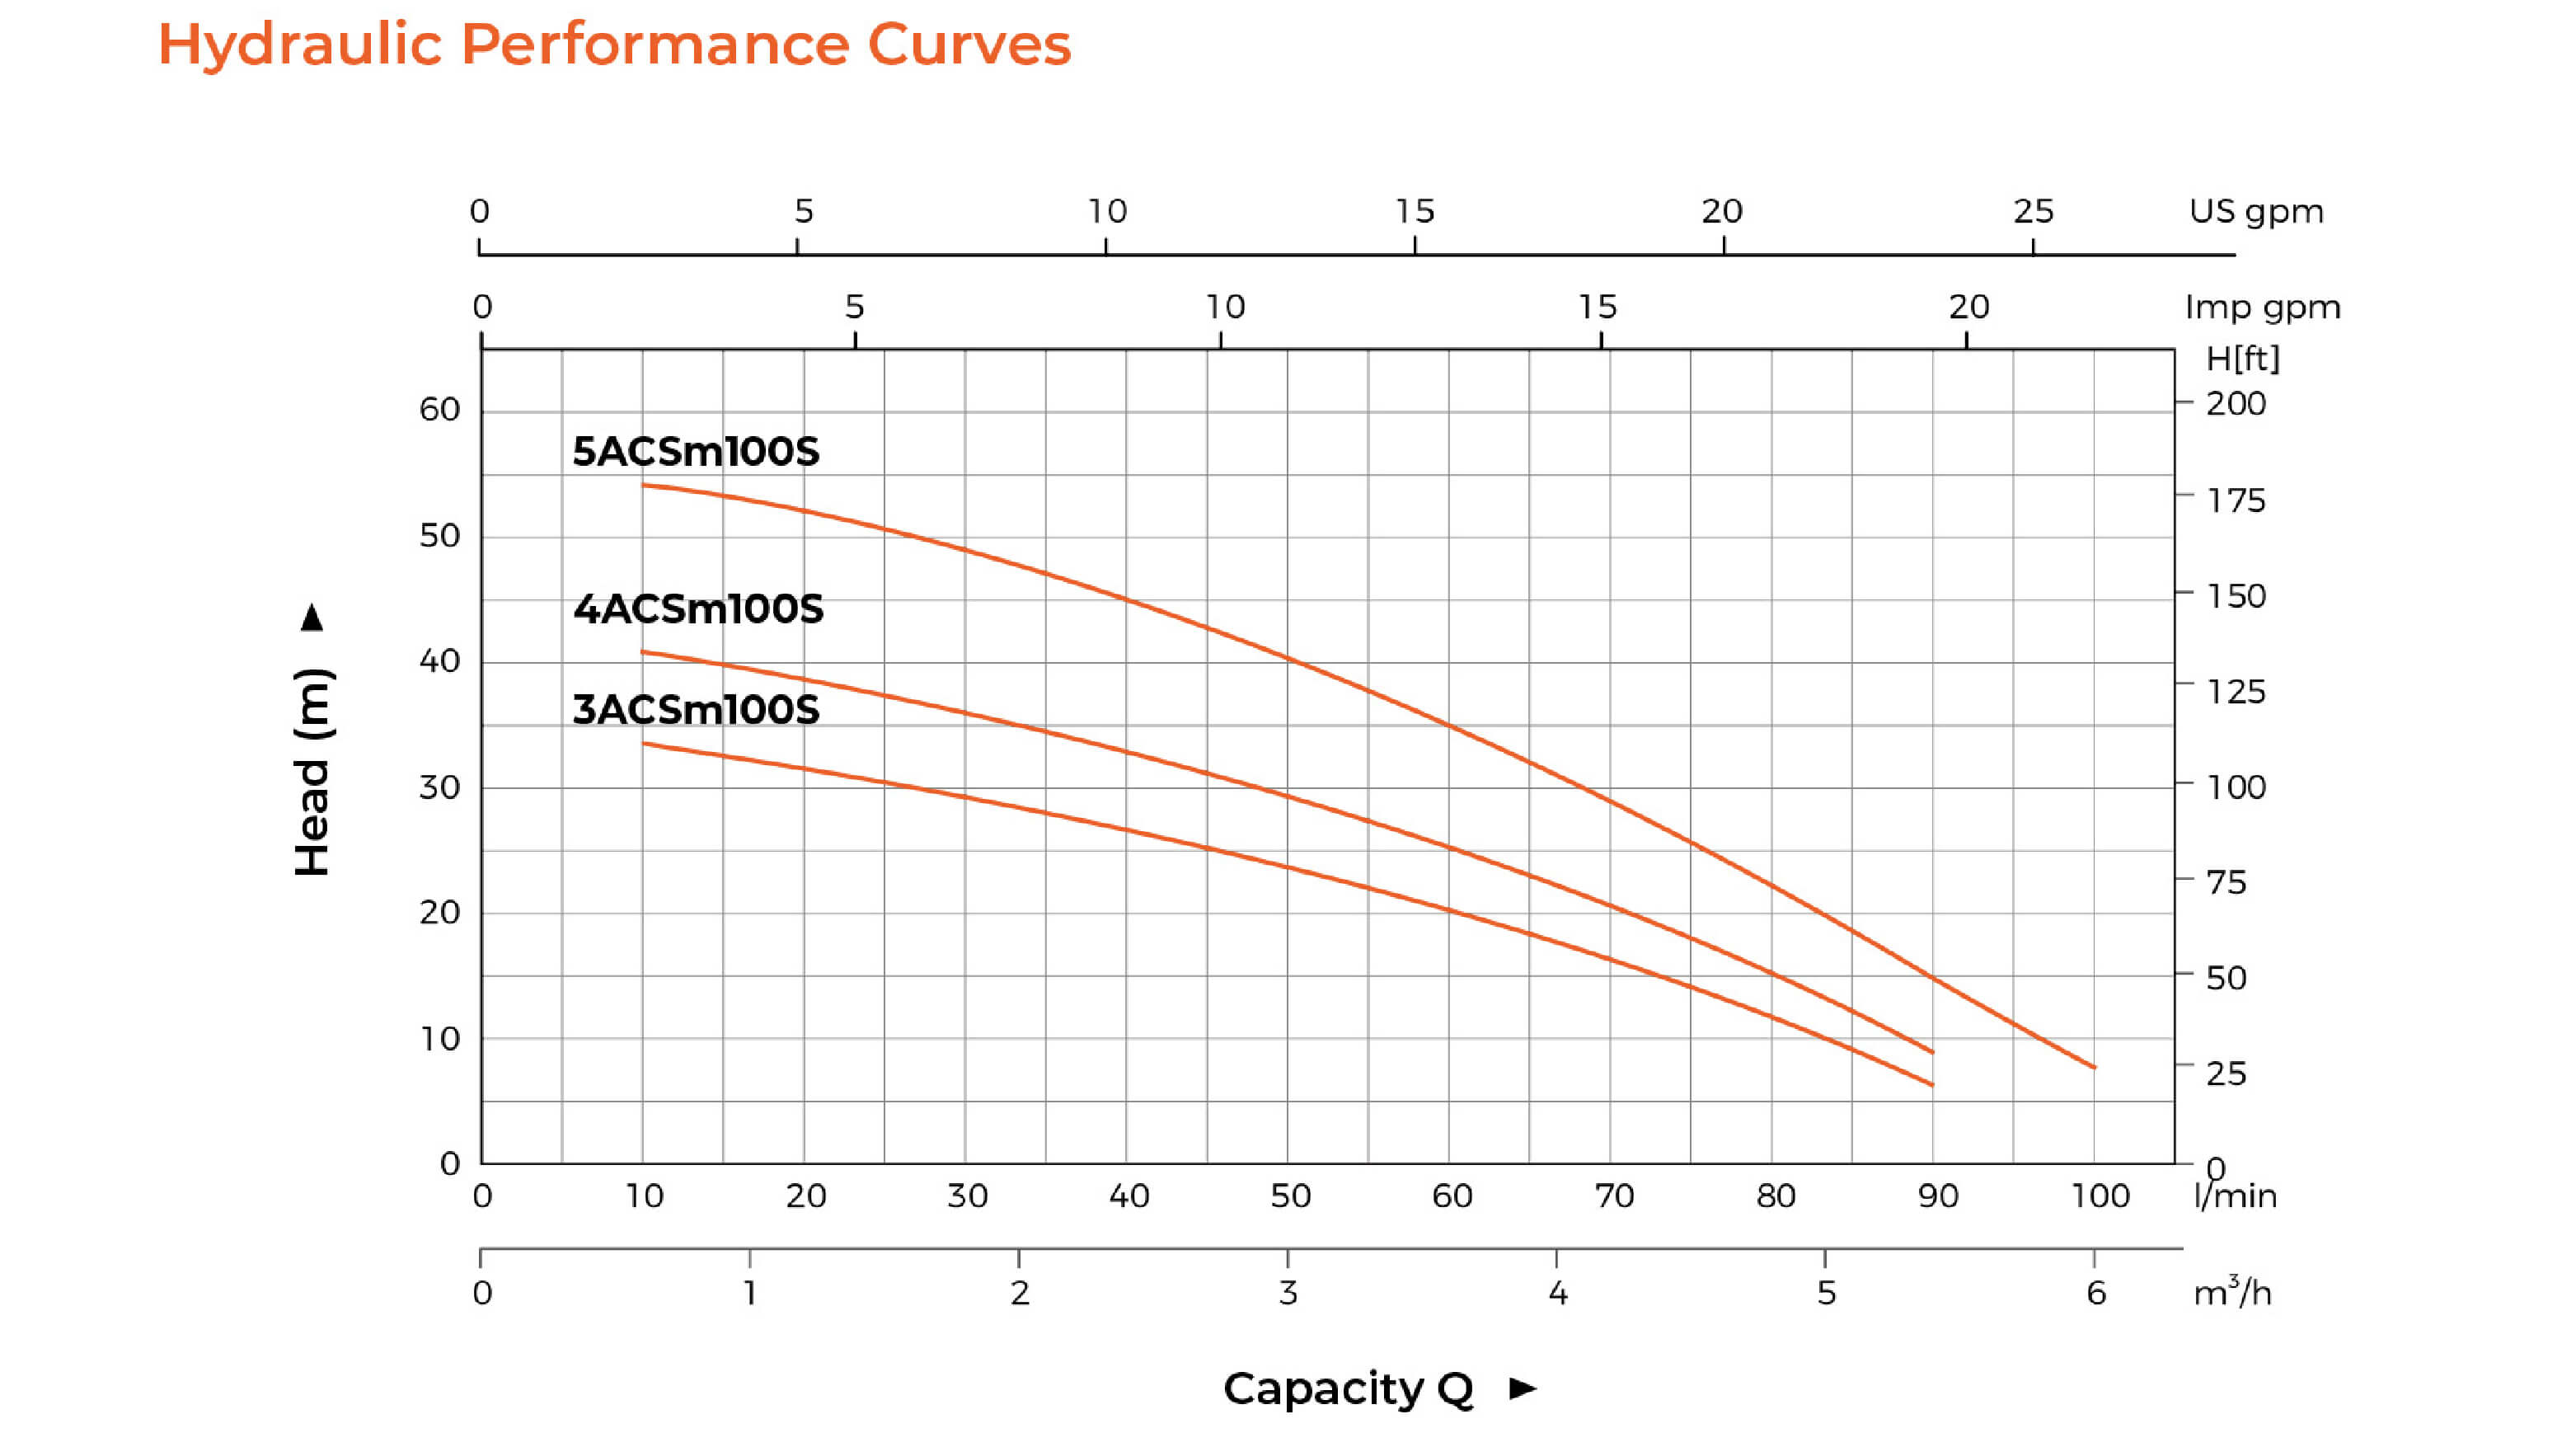 ACSm Self-priming Stainless Steel Multistage Centrifugal Pump Hydraulic Performance Curves